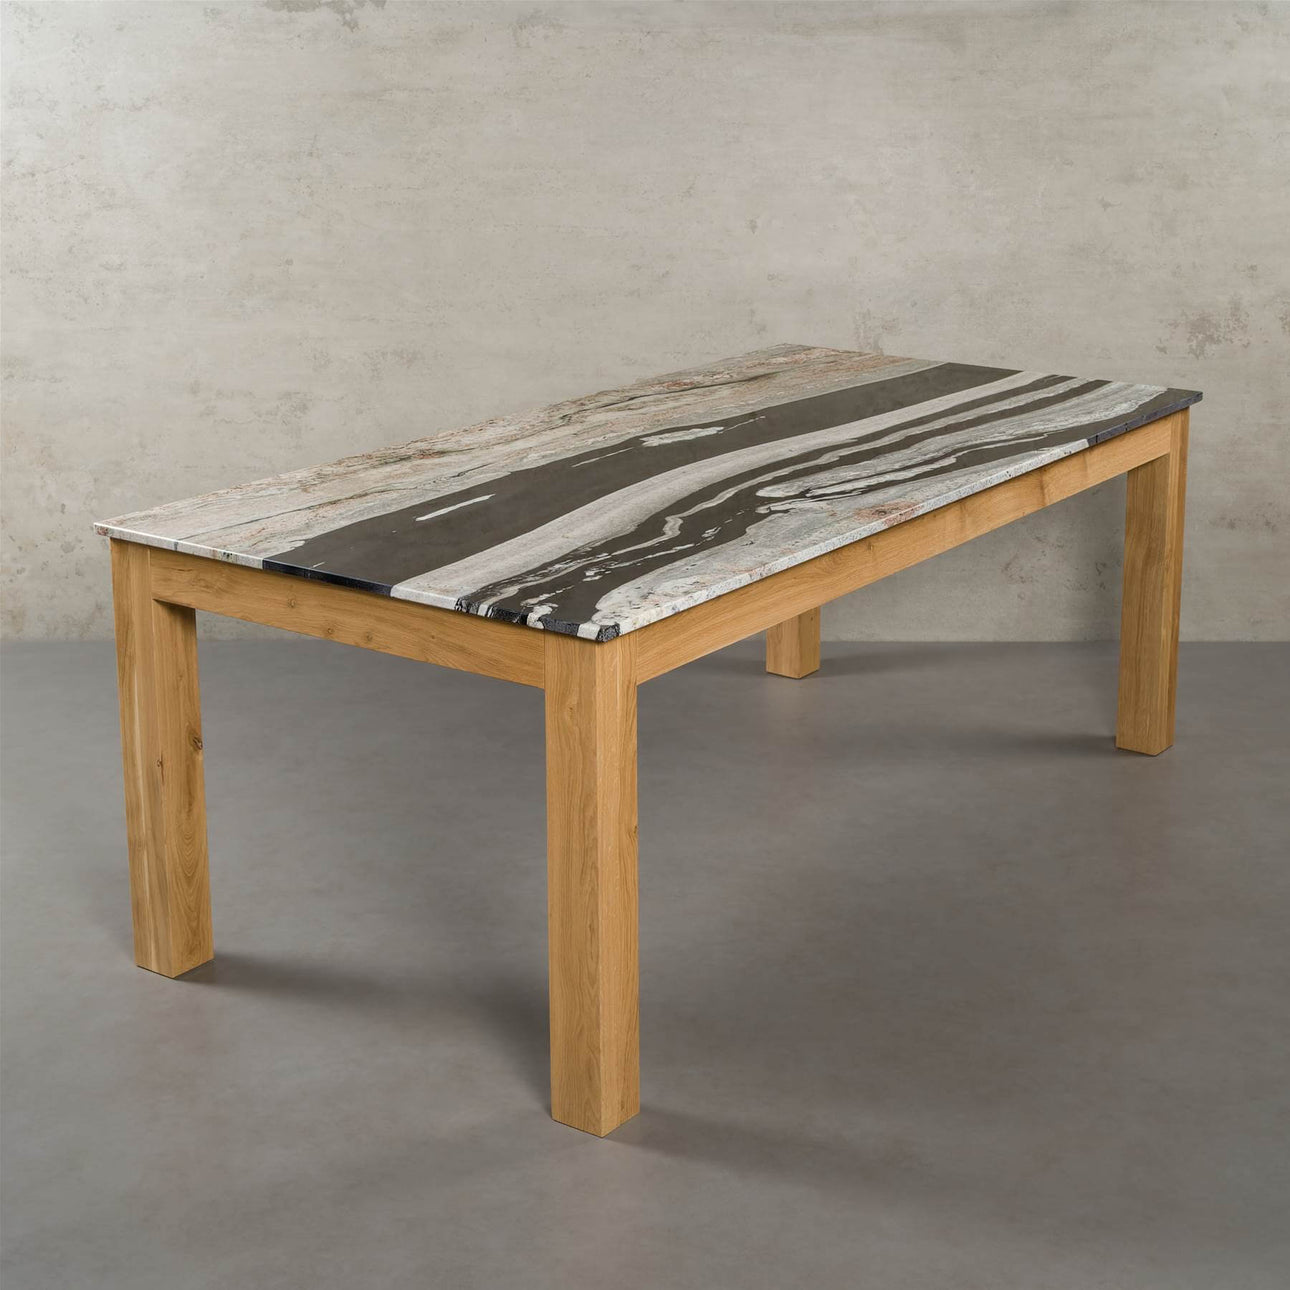 Valencia marble dining table